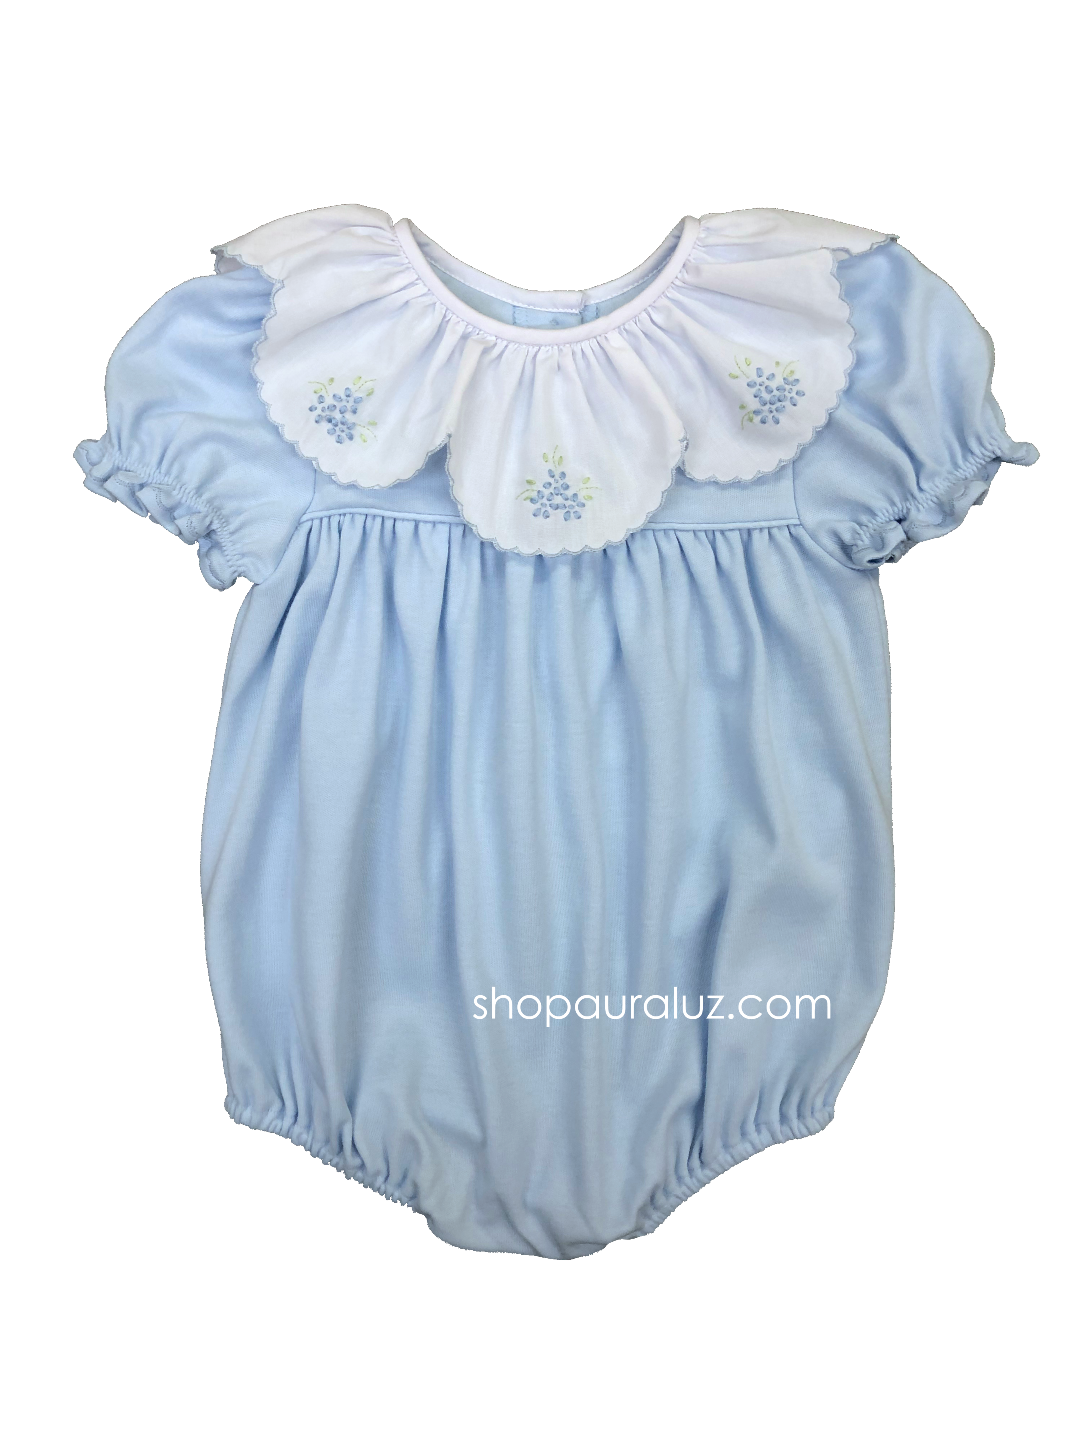 Auraluz Knit Bubble..Blue with ruffle collar and embroidered flowers